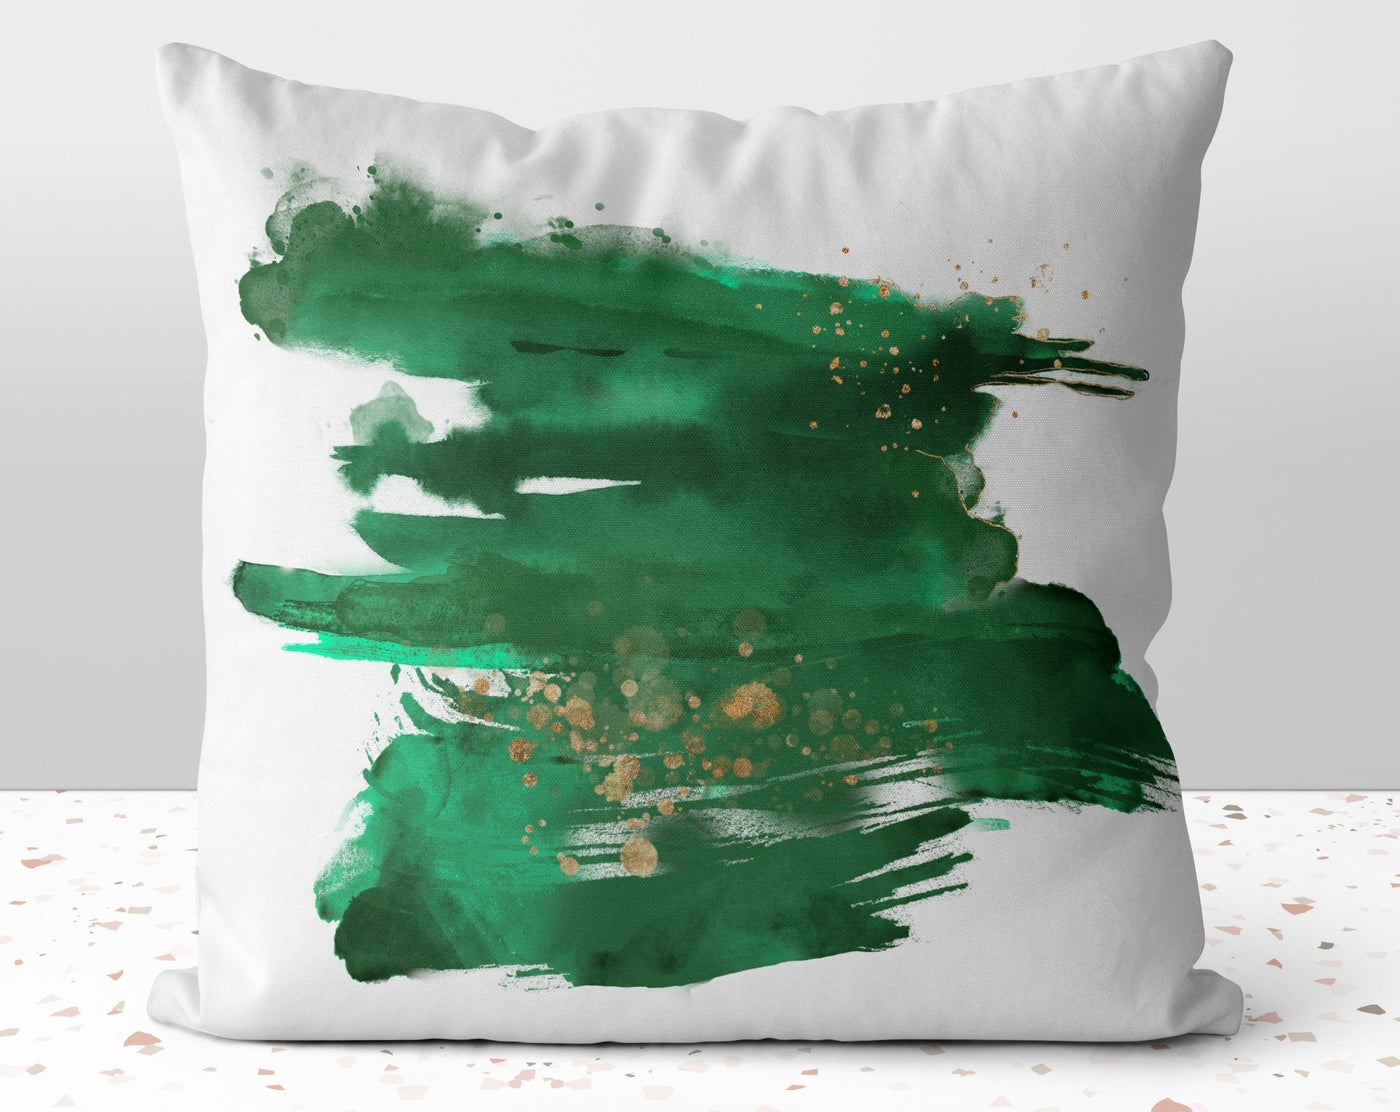 Abstract Emerald Green Brush Strokes with Gold Printed Accents Pillow Throw Cover with Insert - Cush Potato Pillows